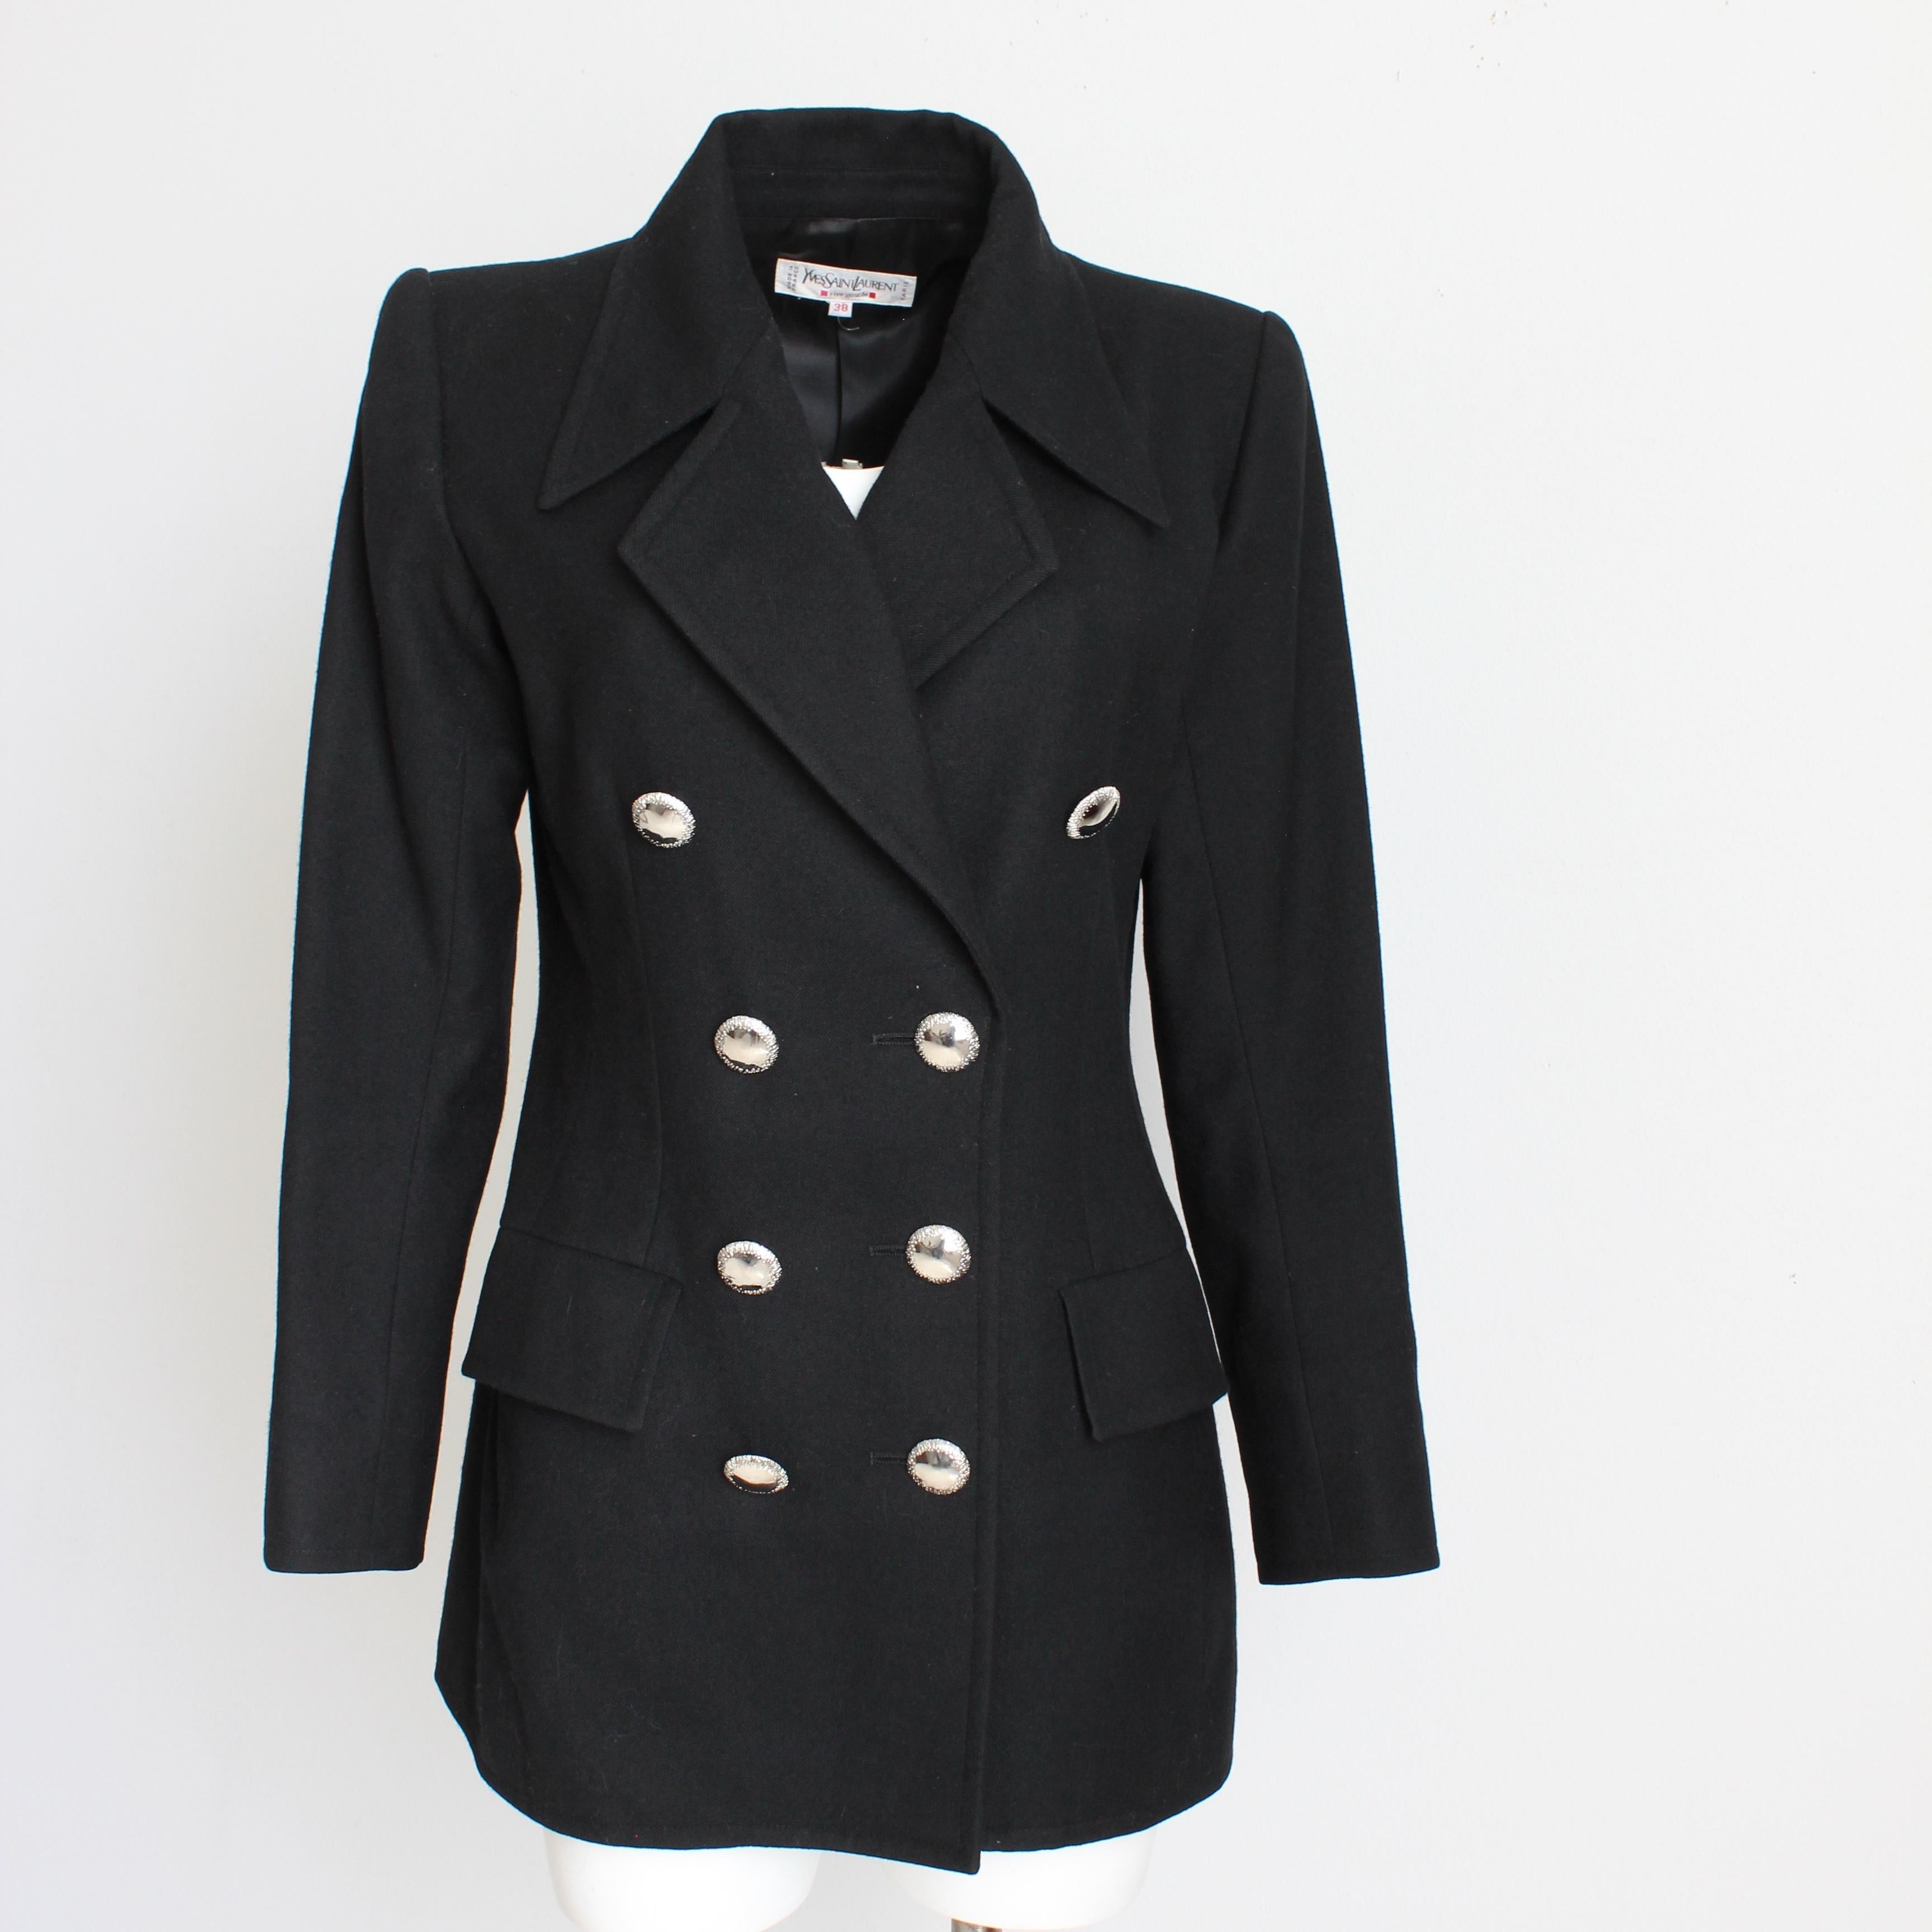 Yves Saint Laurent Jacket Black Wool Double Breasted Pea Coat Style Vintage 90s For Sale 4